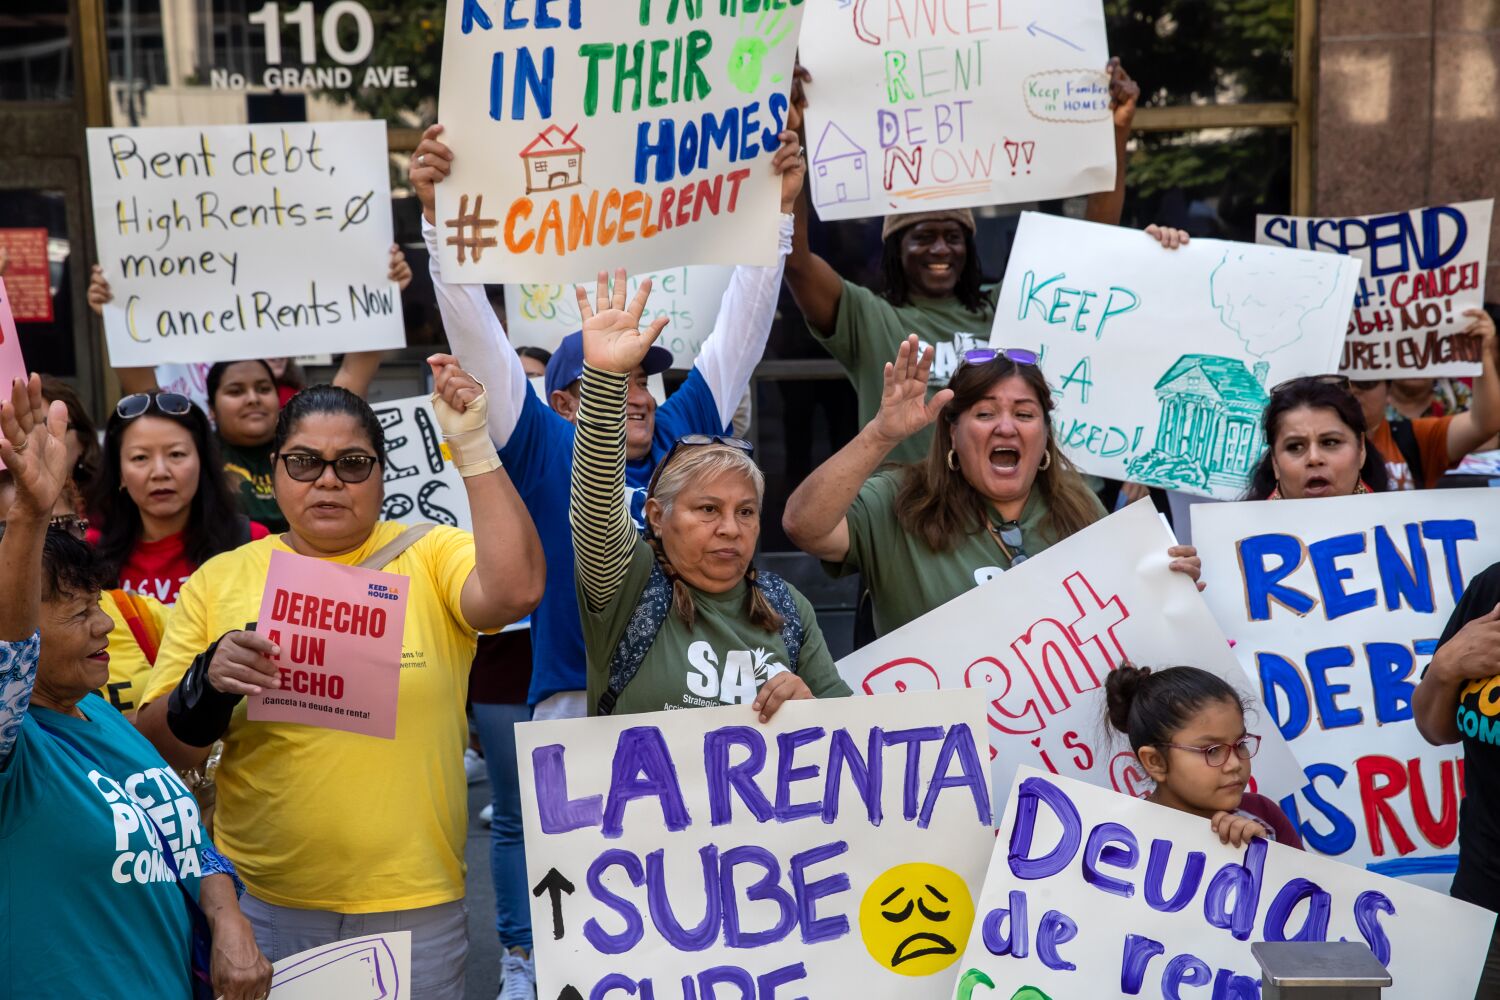 Are you an L.A. tenant living in a rent-stabilized apartment? We want to hear from you